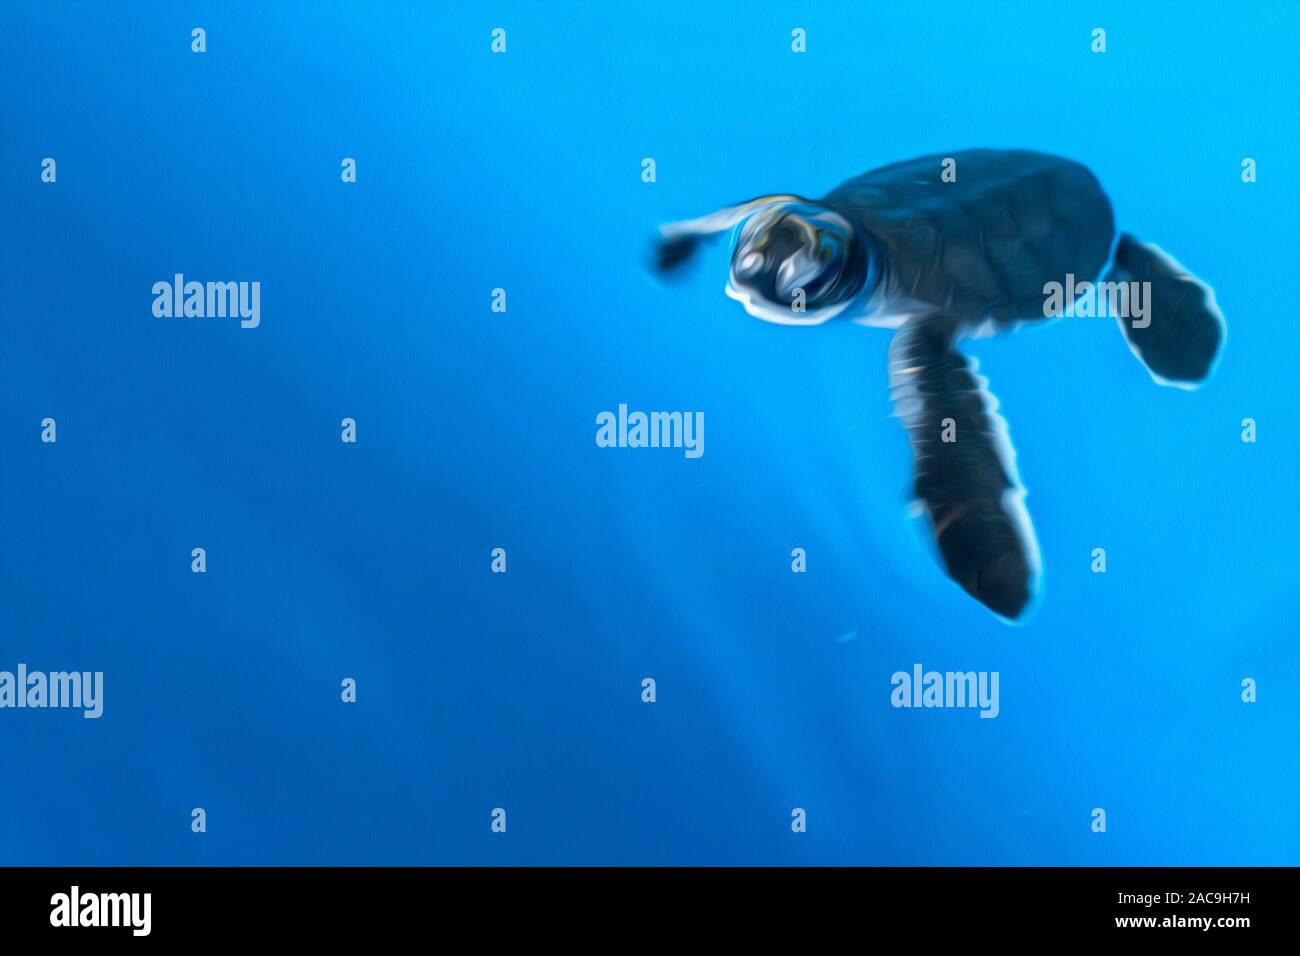 A little newborn turtle is swimming in blue water. Stylization as an oil painting. Copy space. Stock Photo